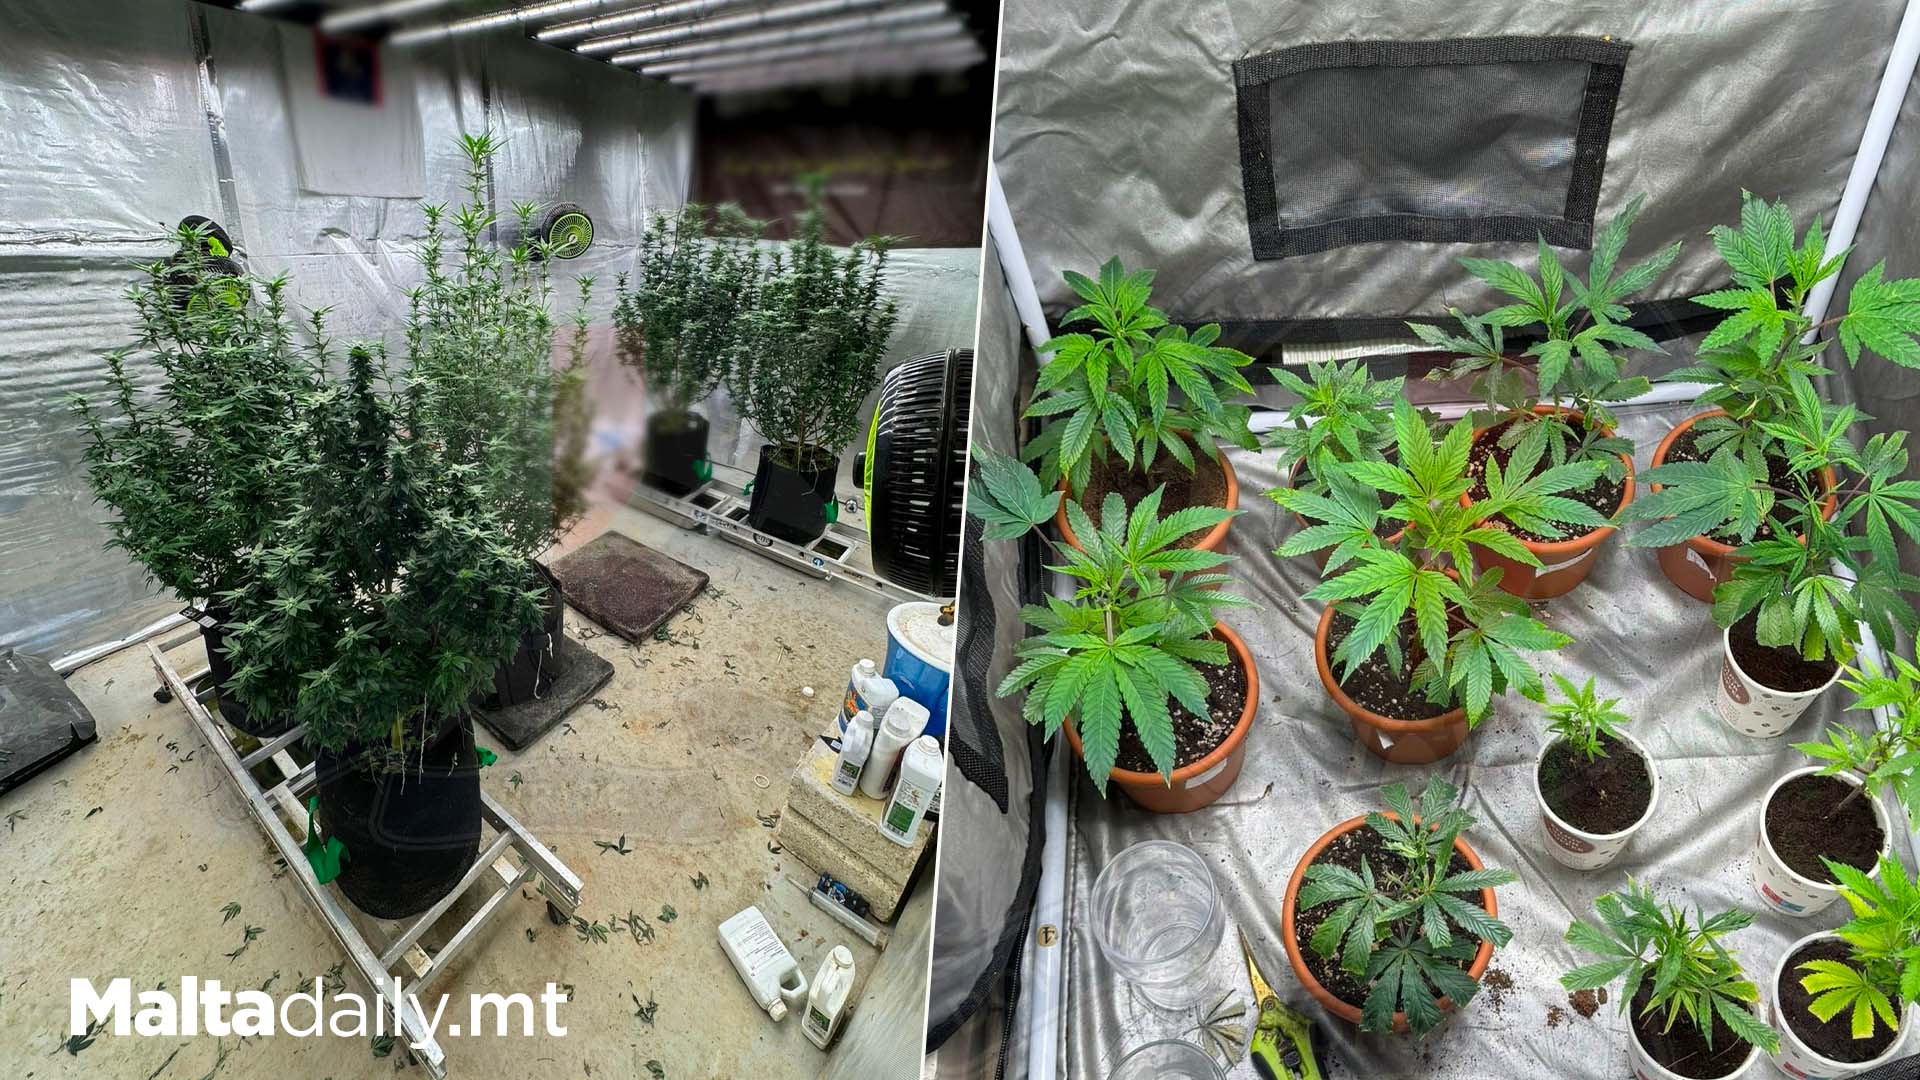 Two Arrested For Cultivating Cannabis Plants & Cocaine